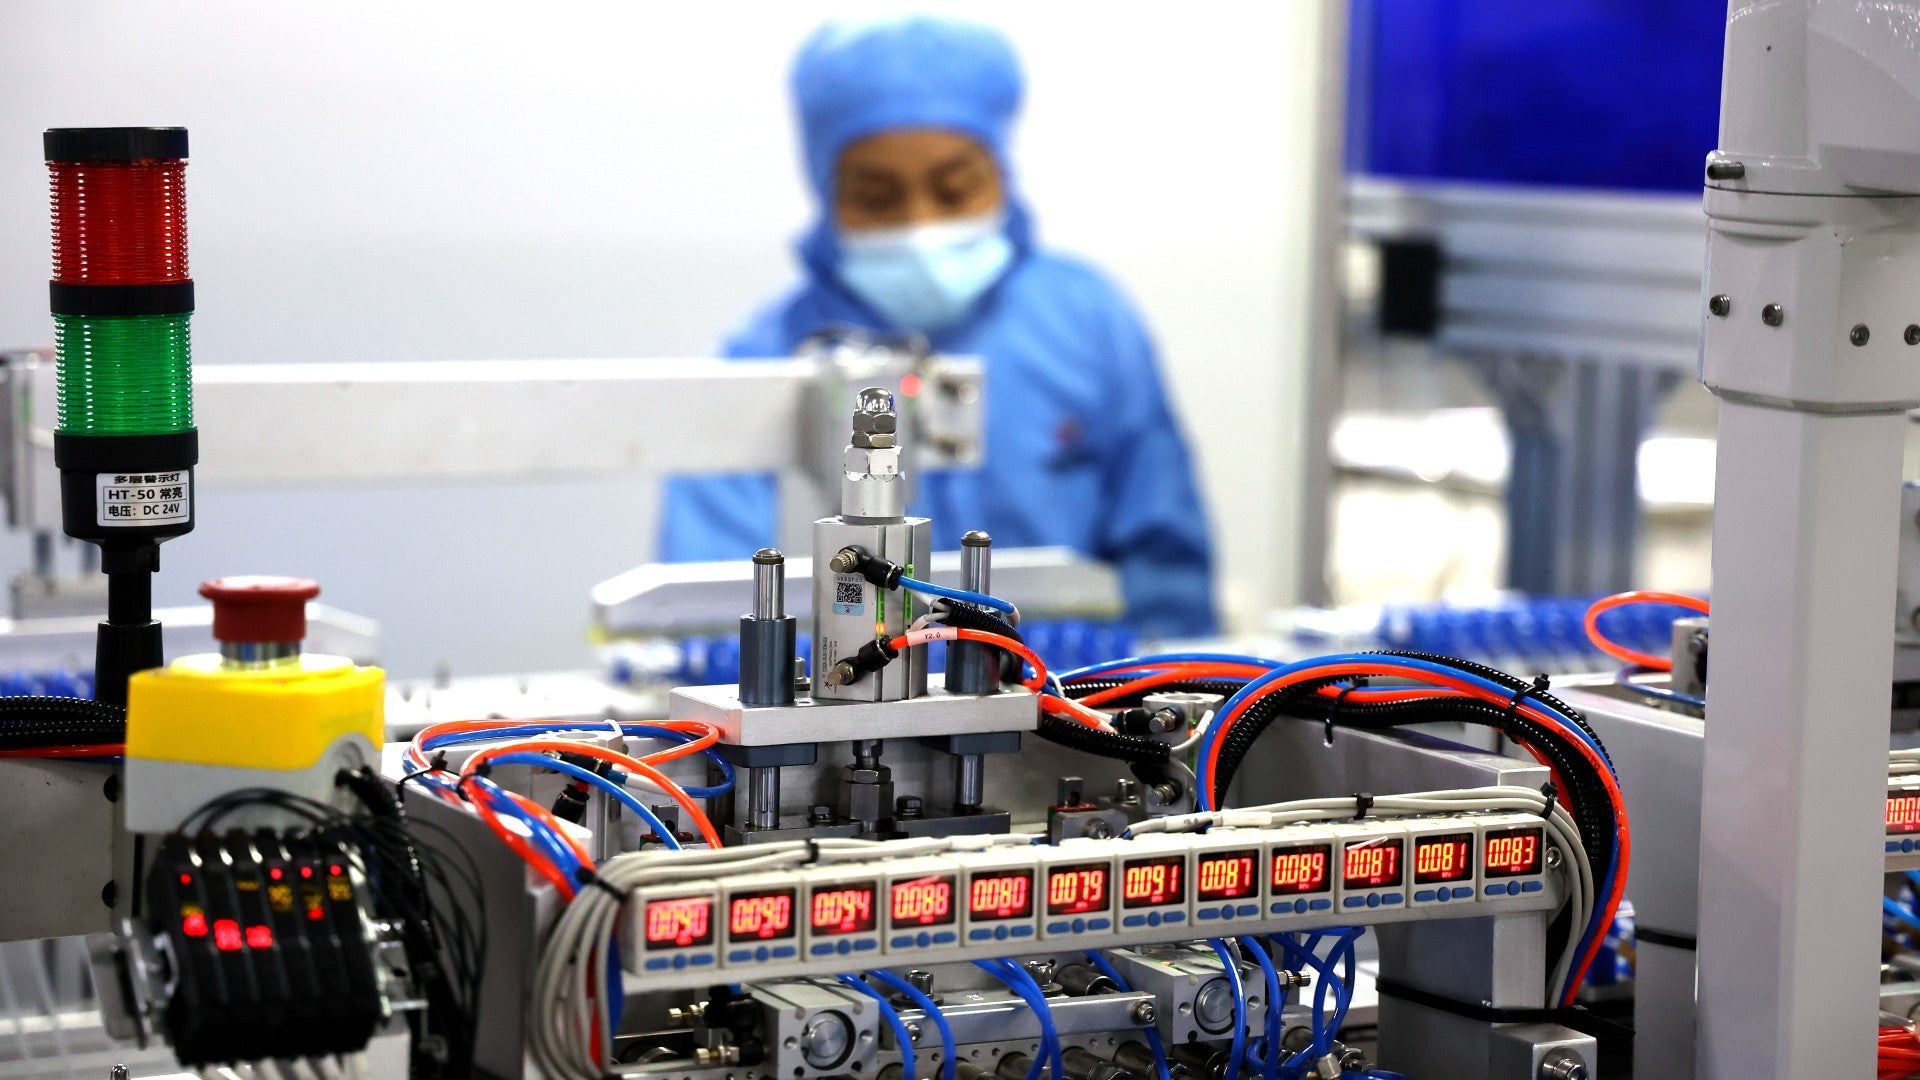 China’s mass surveillance may be key to growth in medical device sector